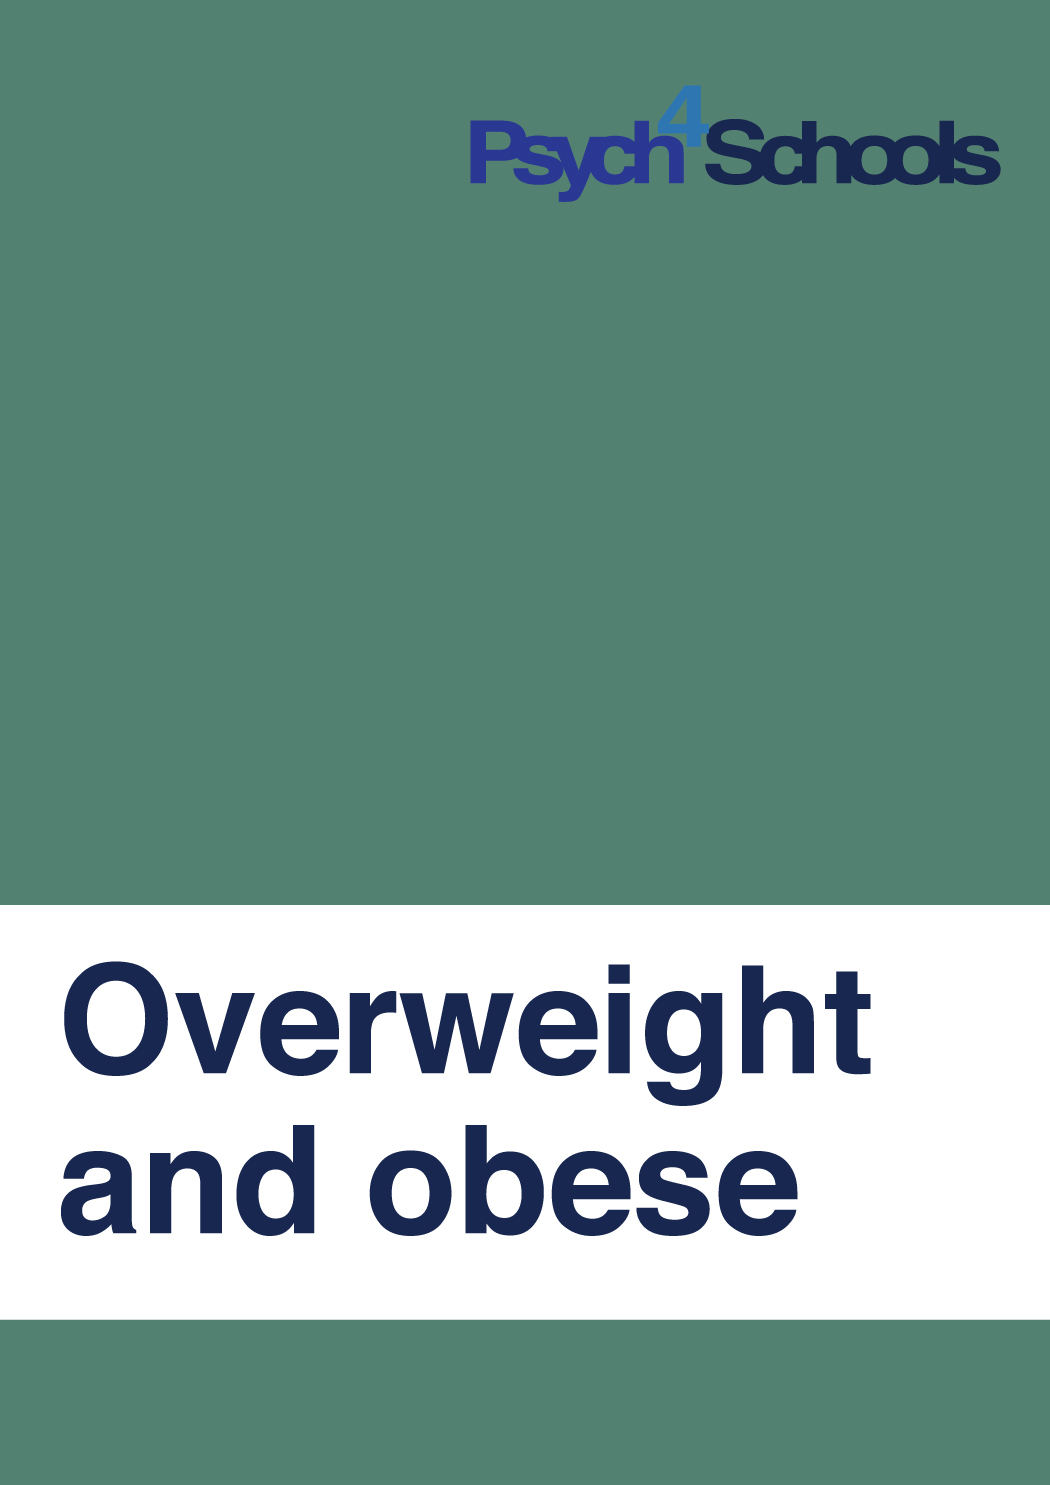 Obese or overweight